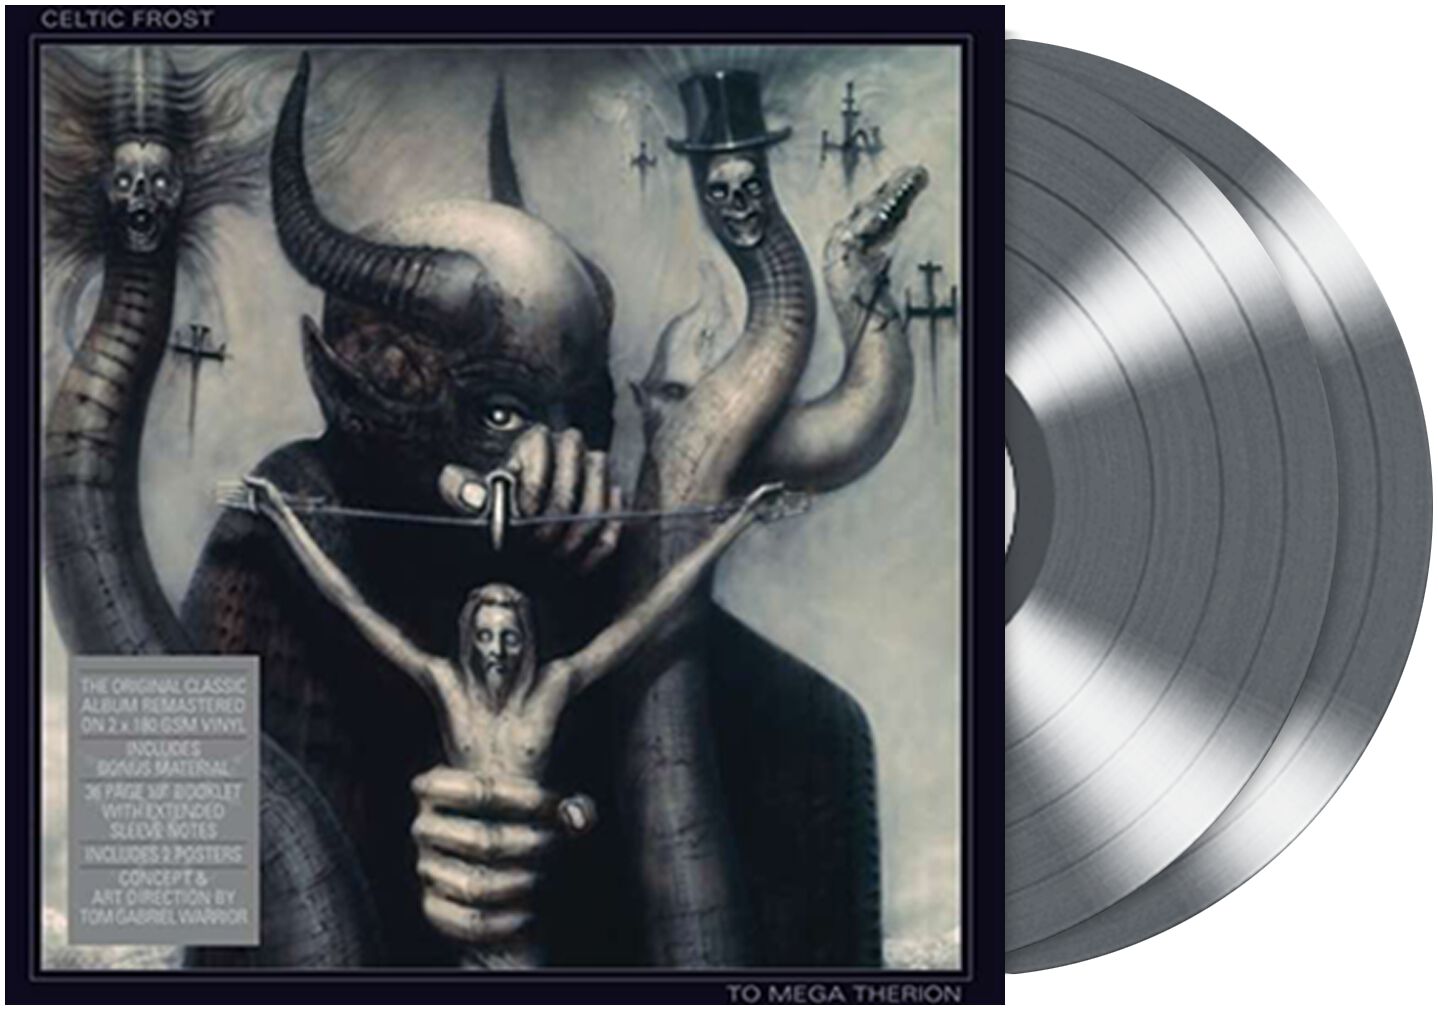 Celtic Frost To mega therion LP silver coloured